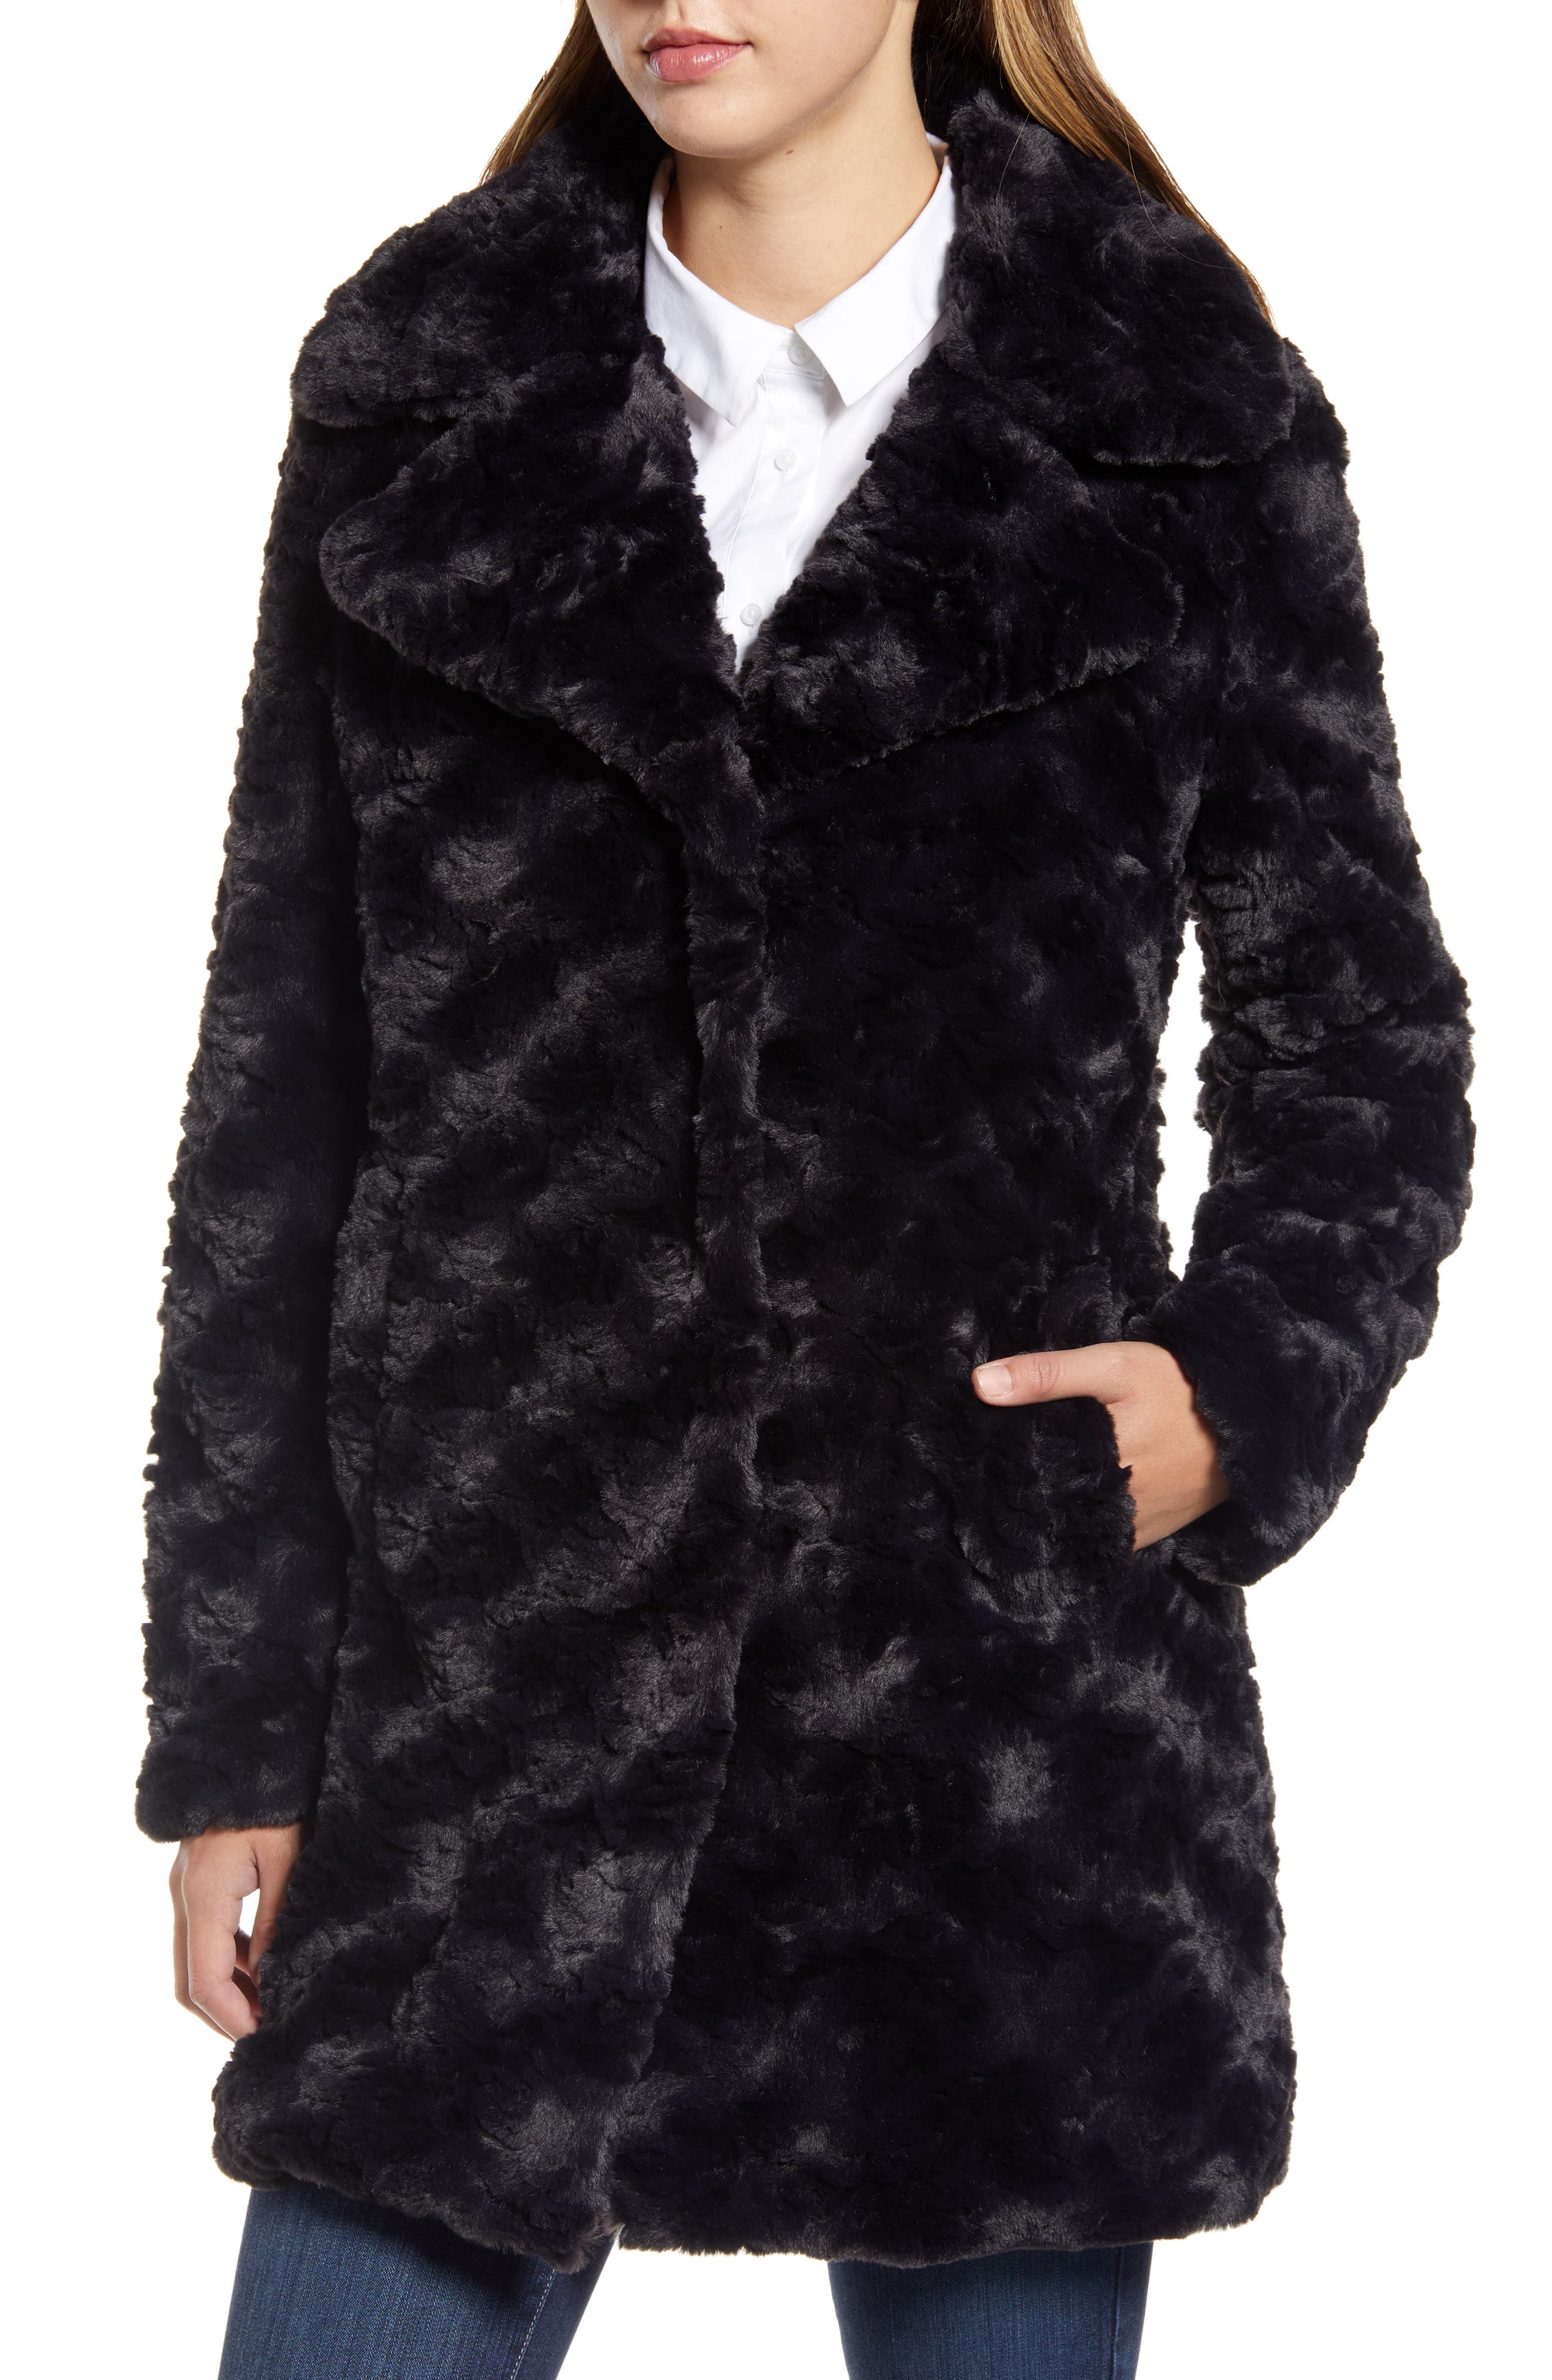 Kenneth Cole New York | Textured Faux Fur Coat | Nordstrom Rack